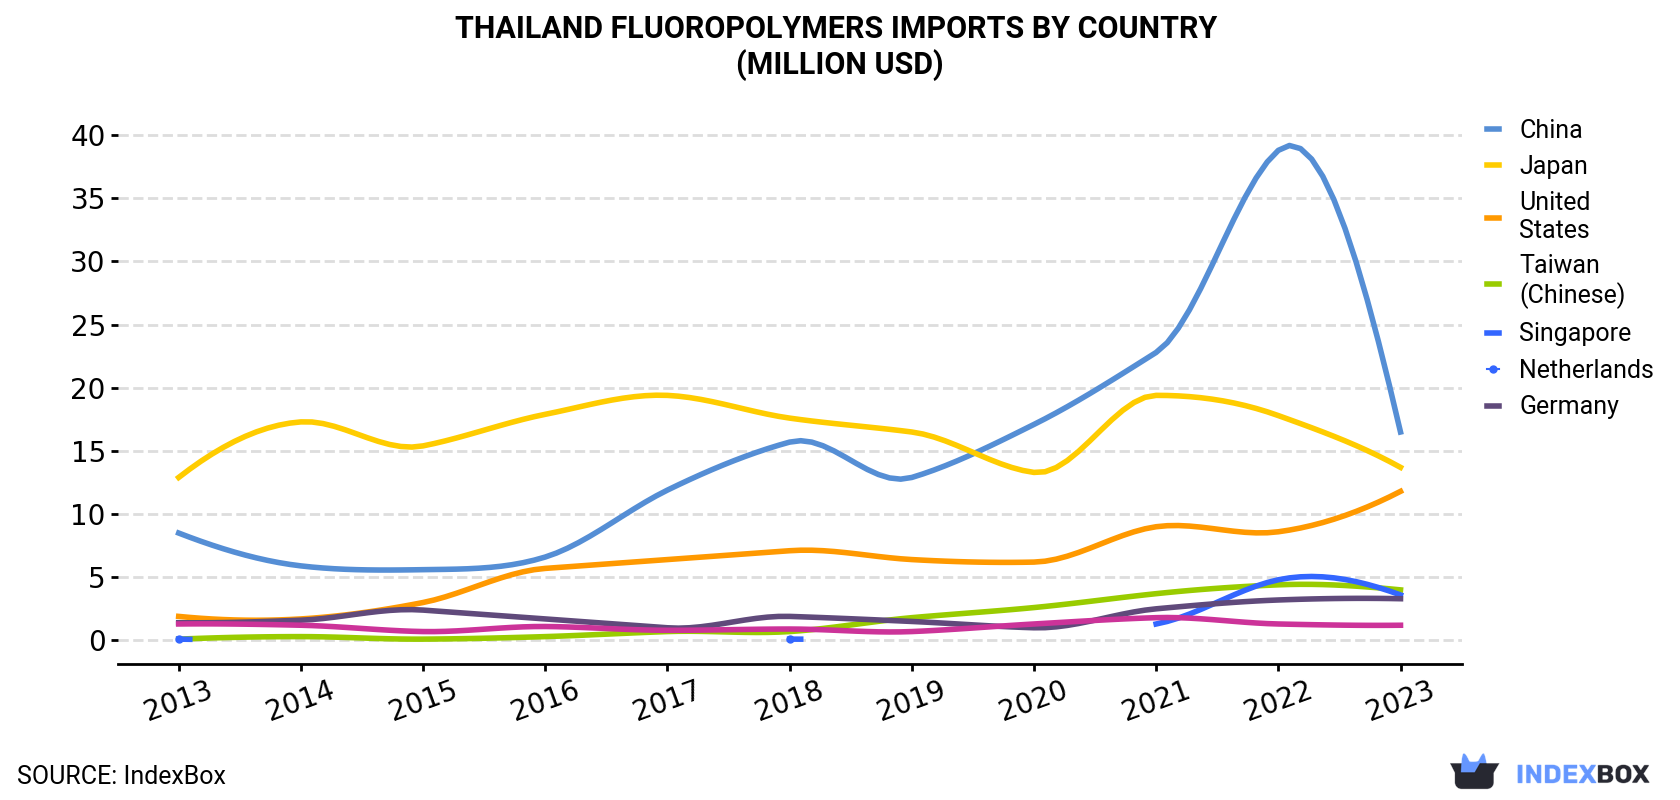 Thailand Fluoropolymers Imports By Country (Million USD)